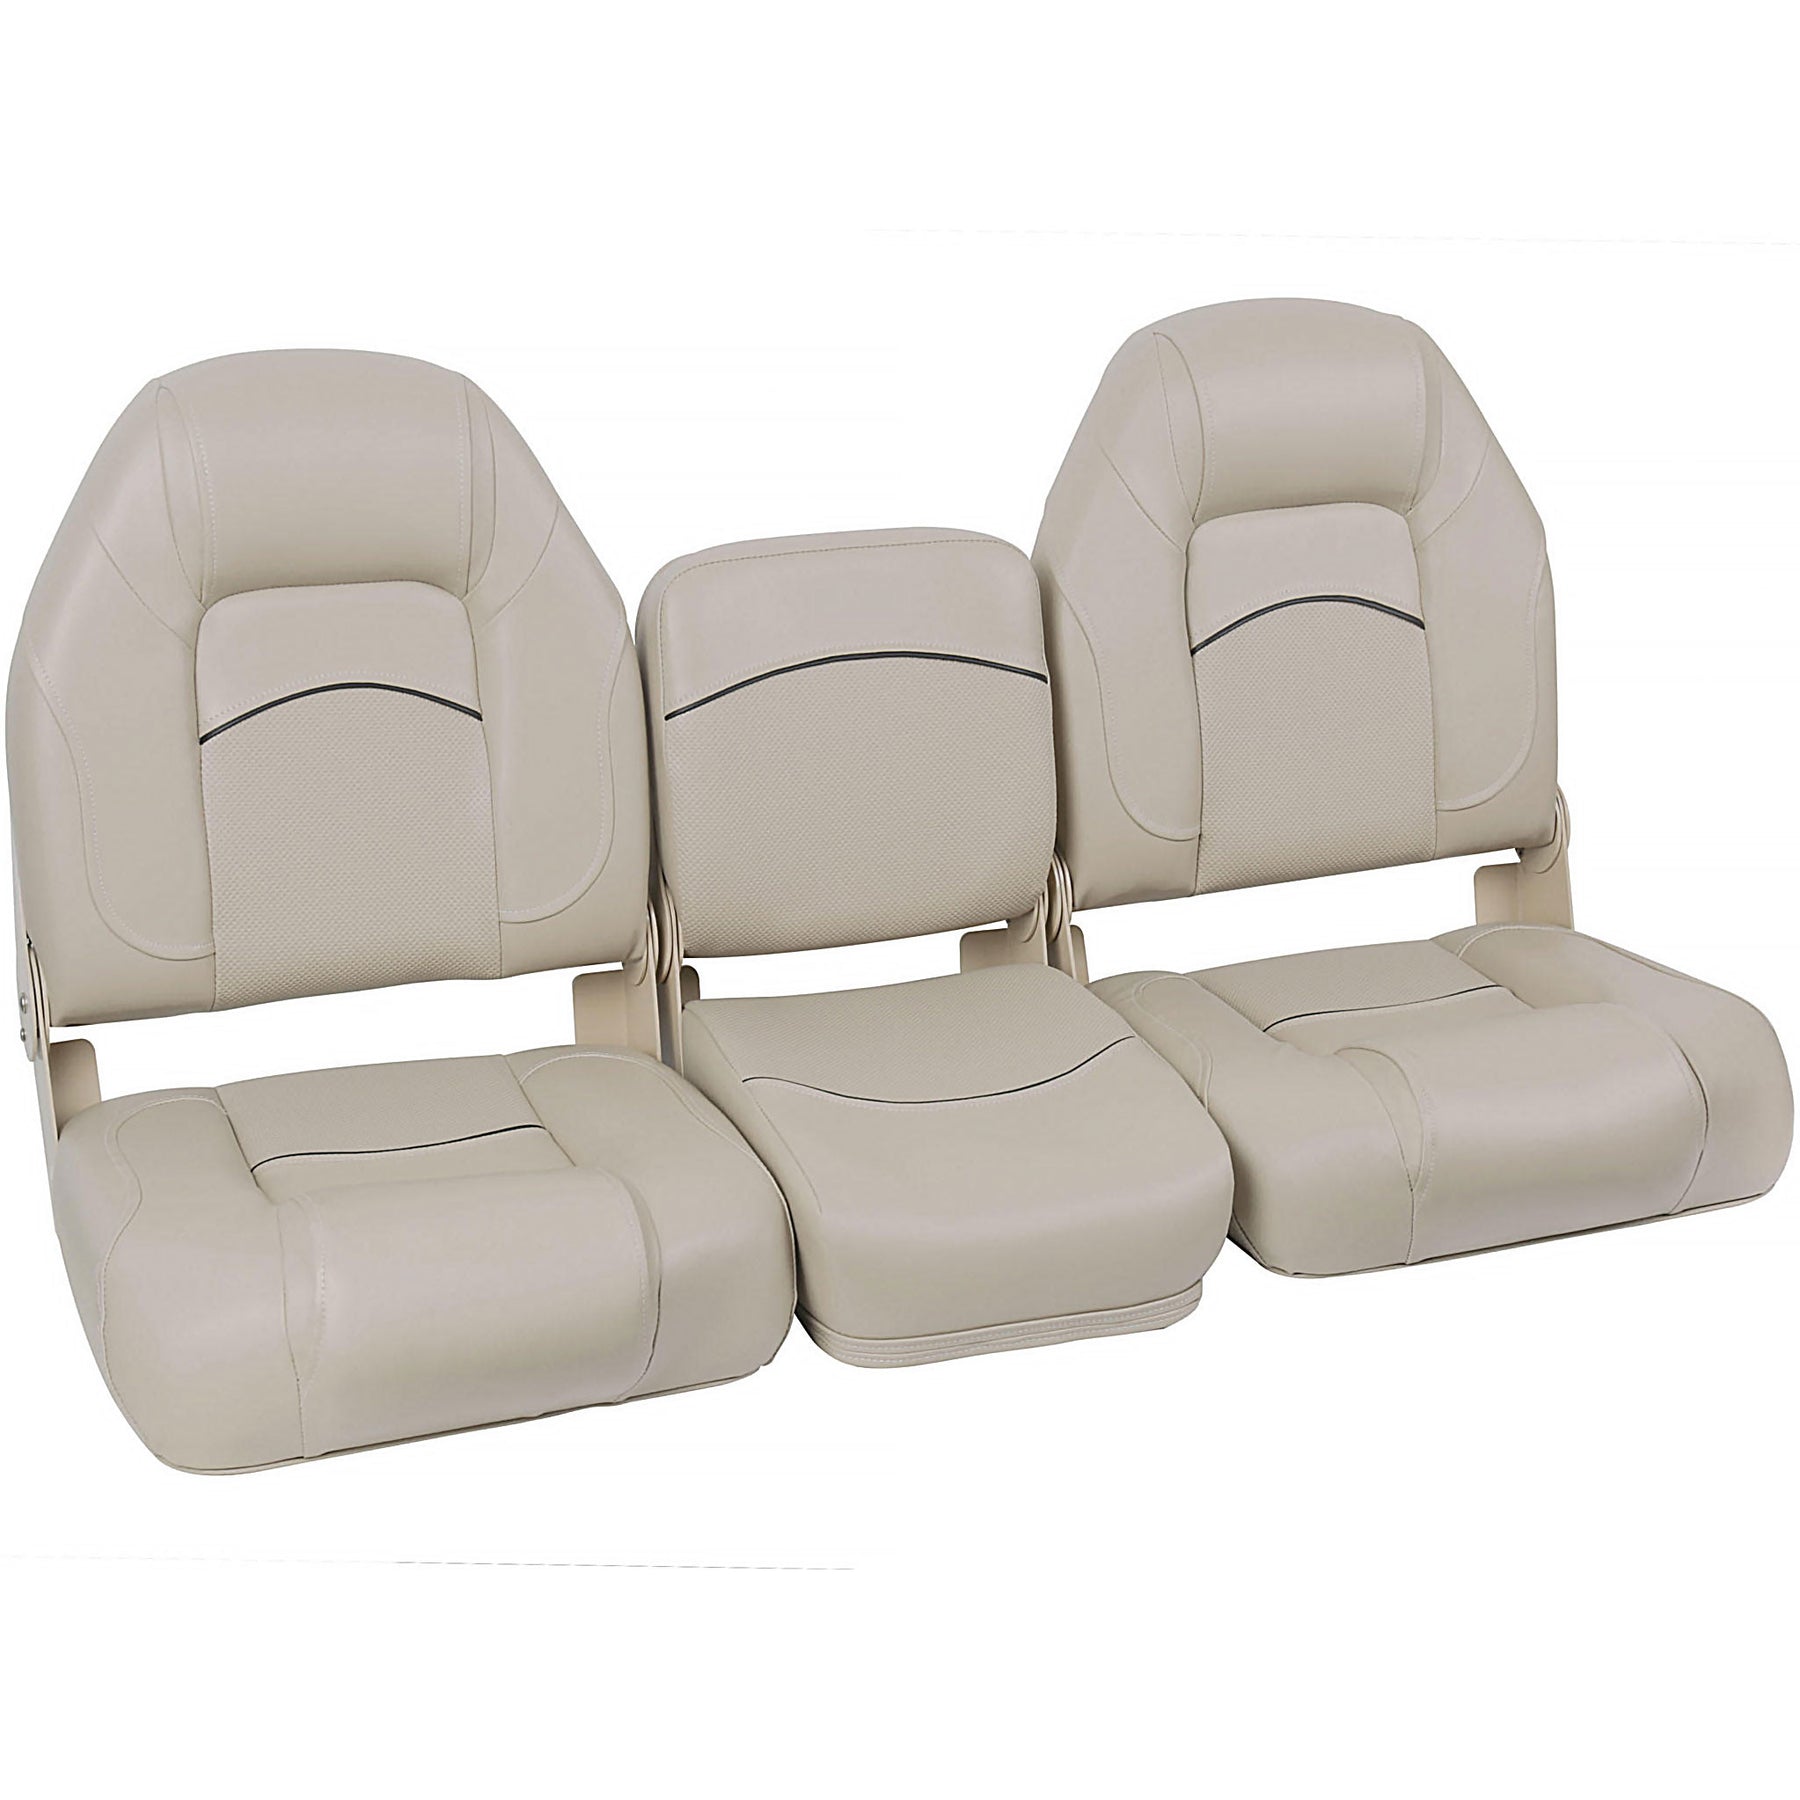 Double bench seat with Isofix for vehicles without double bottom, Rock n  Roll Bed, Motorhome & Camper Seats, Seat Belts, Swivel Seats, Benches, Camping Accessories